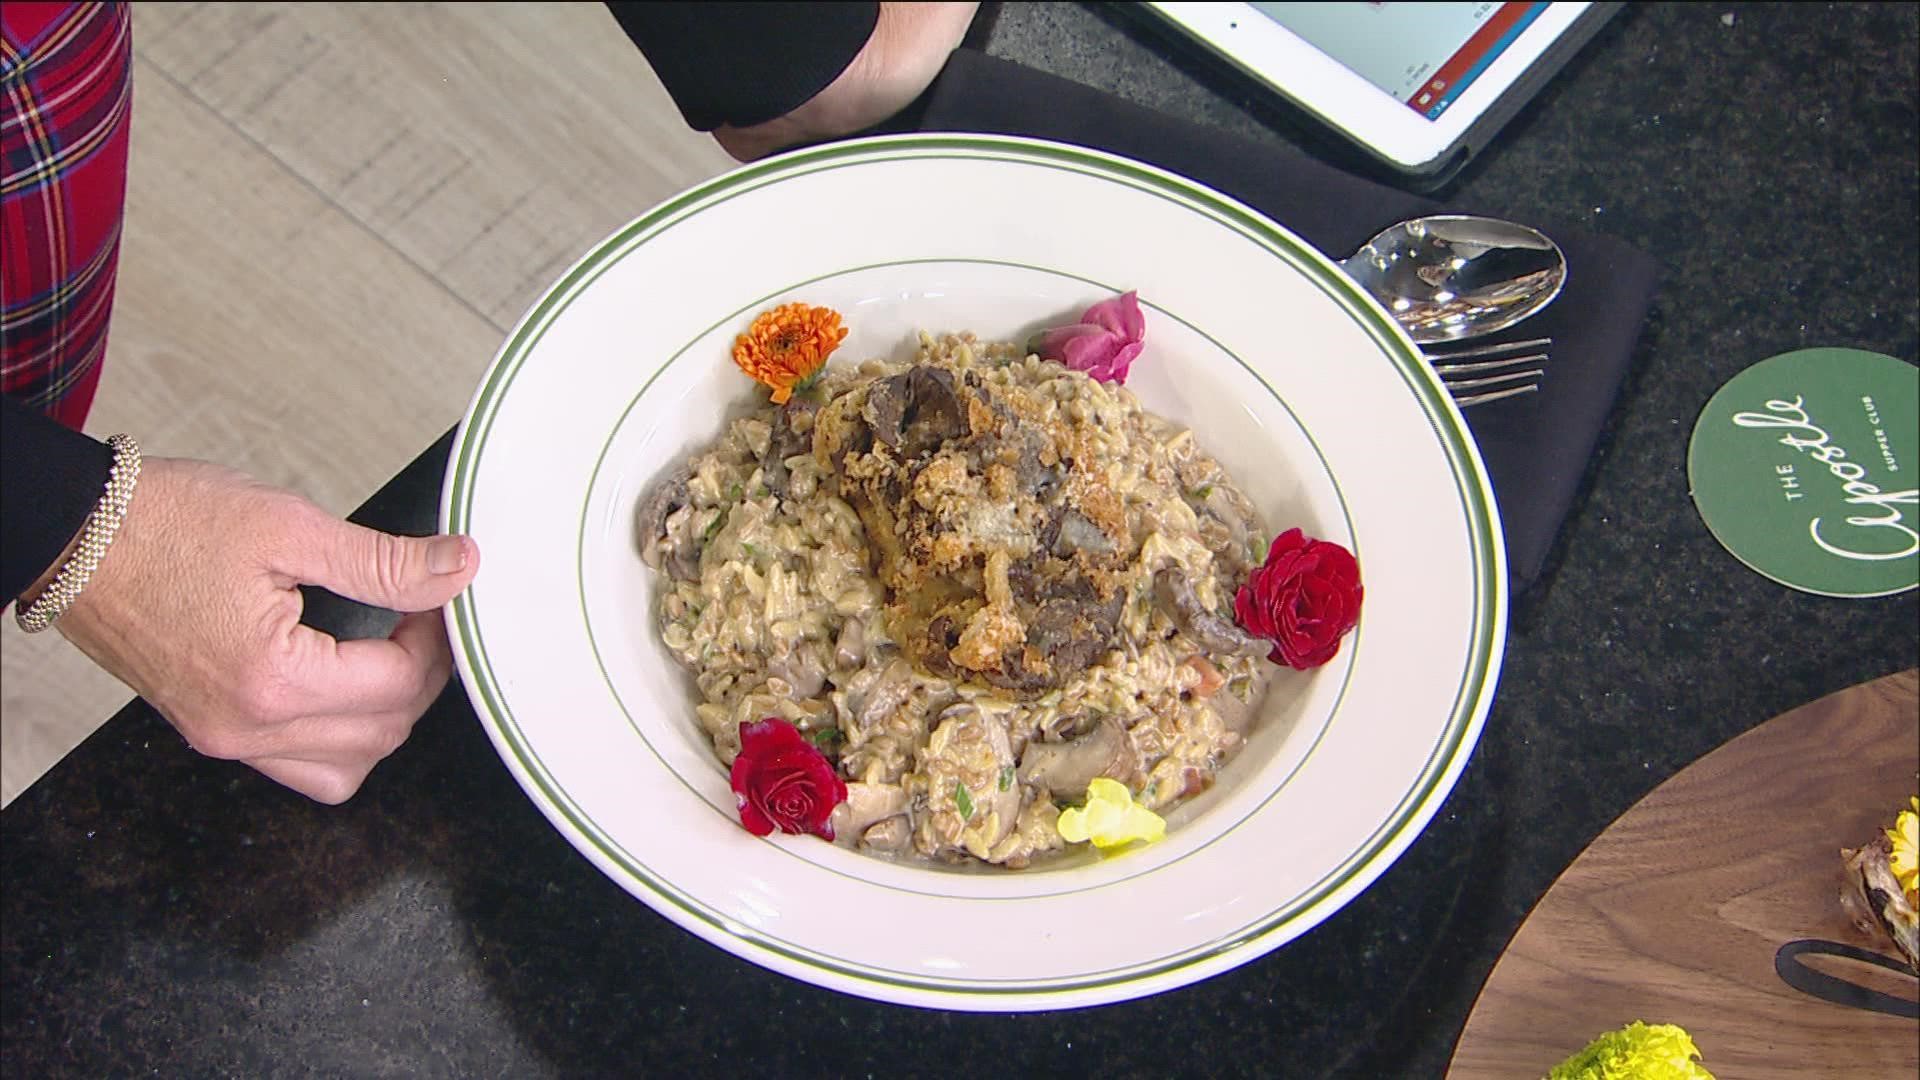 Chef Brian Ingram stopped by KARE 11 Saturday to share four recipes from Apostle Supper Club.